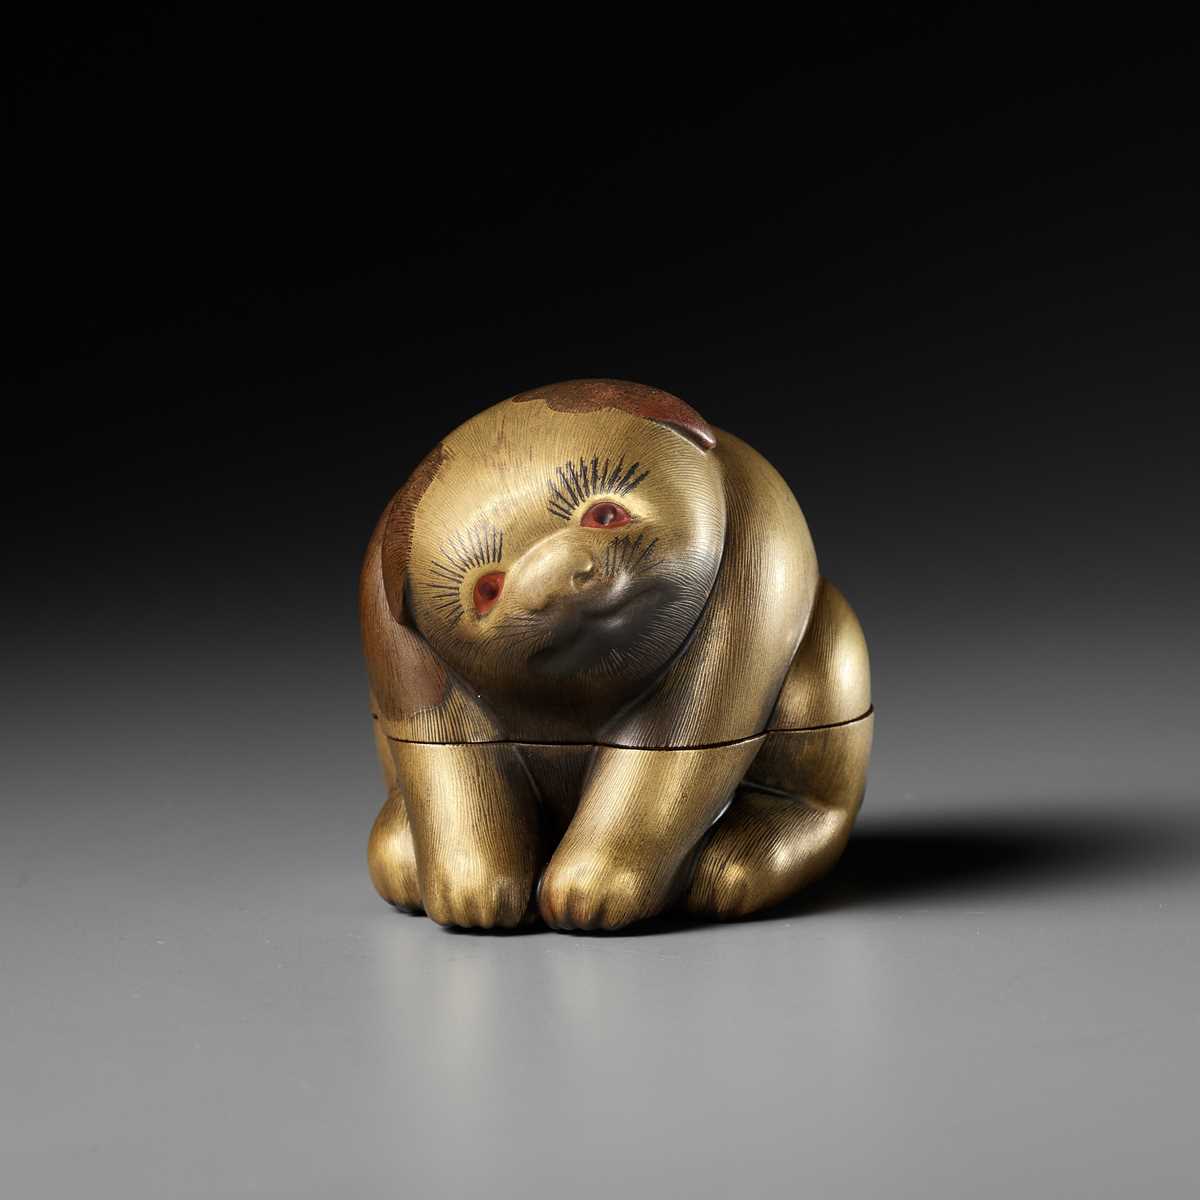 Lot 15 - A LACQUER KOGO (INCENSE BOX) AND COVER IN THE FORM OF A PUPPY